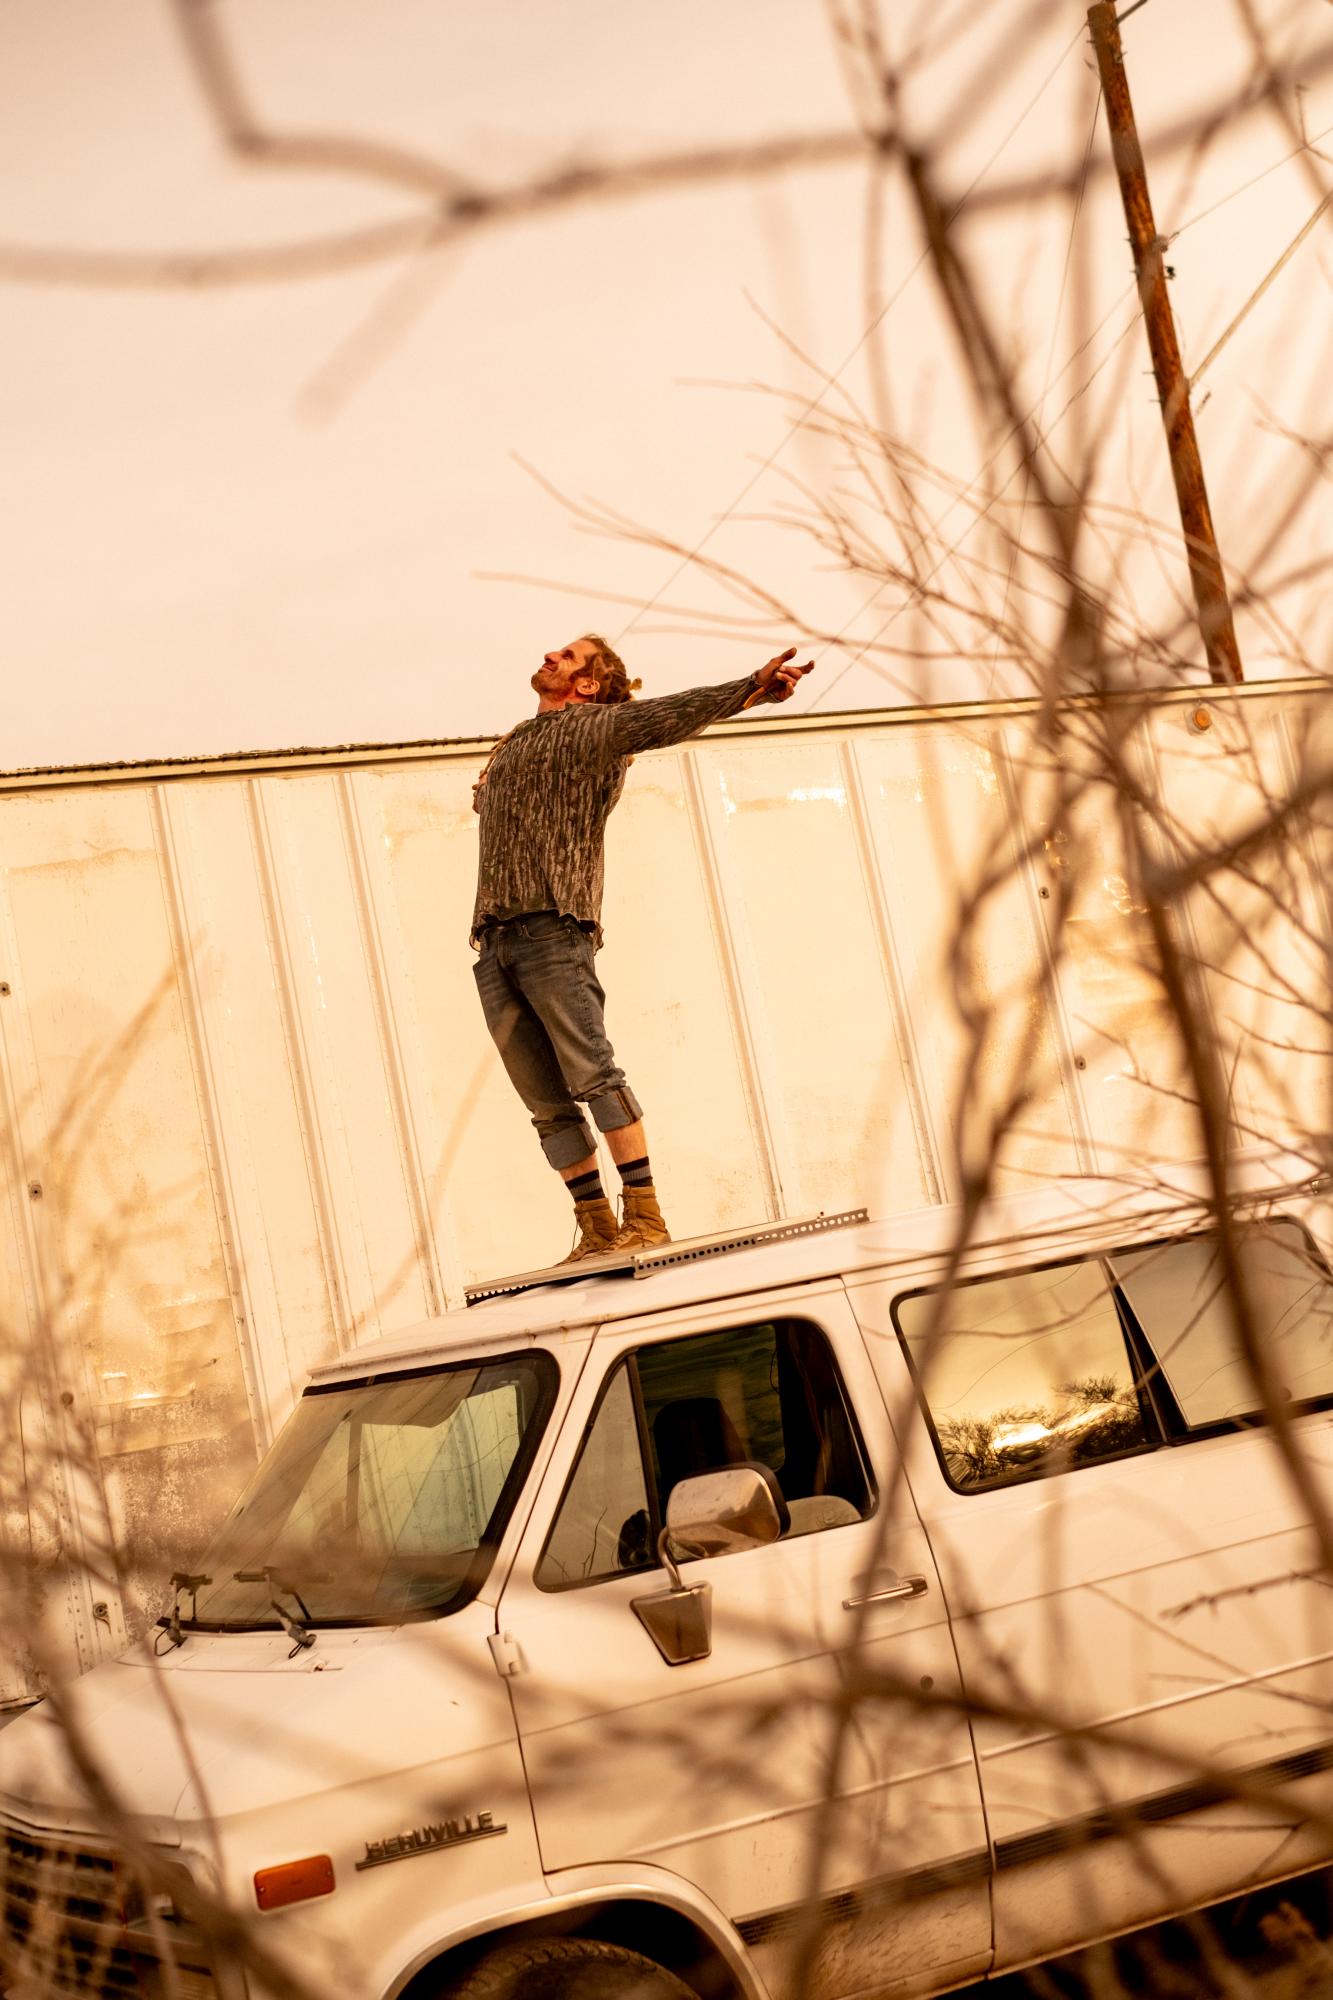 A Warm Winter (An Ongoing Journey) - Brad standing on his van's roof. Quartzsite, Arizona.